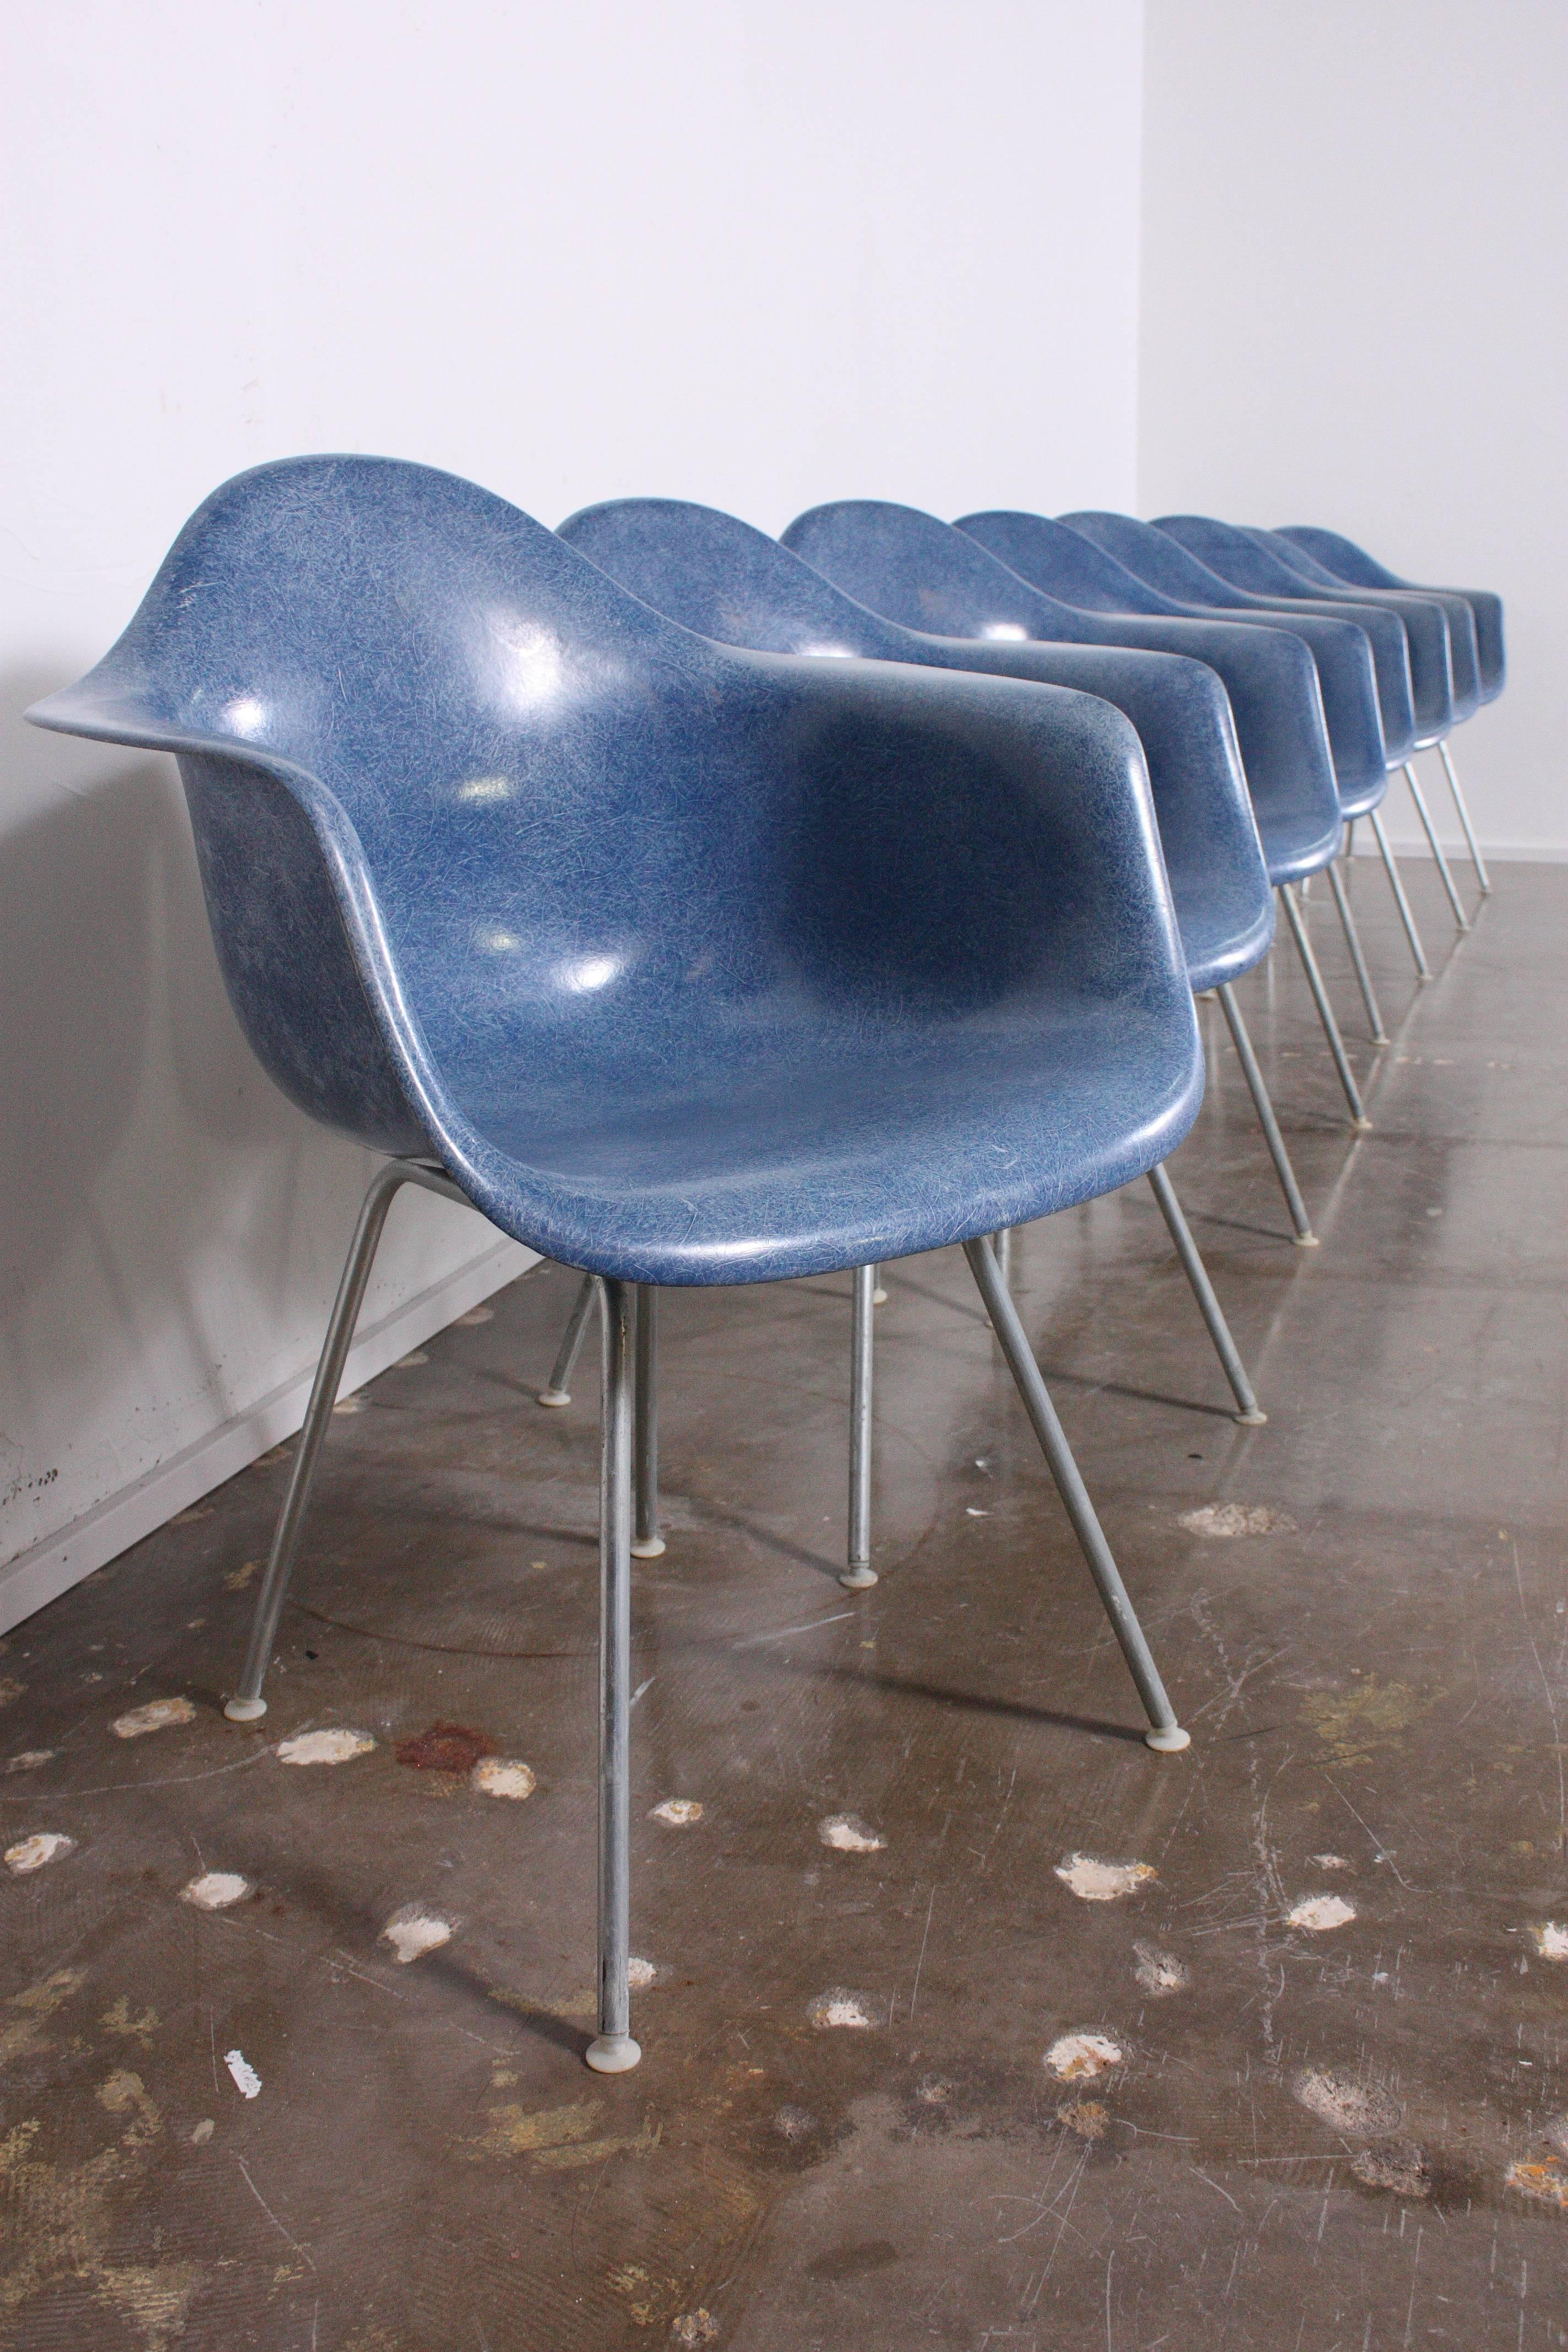 Rare Blue Fiberglass Shell Chairs by Charles Eames for Herman Miller 1